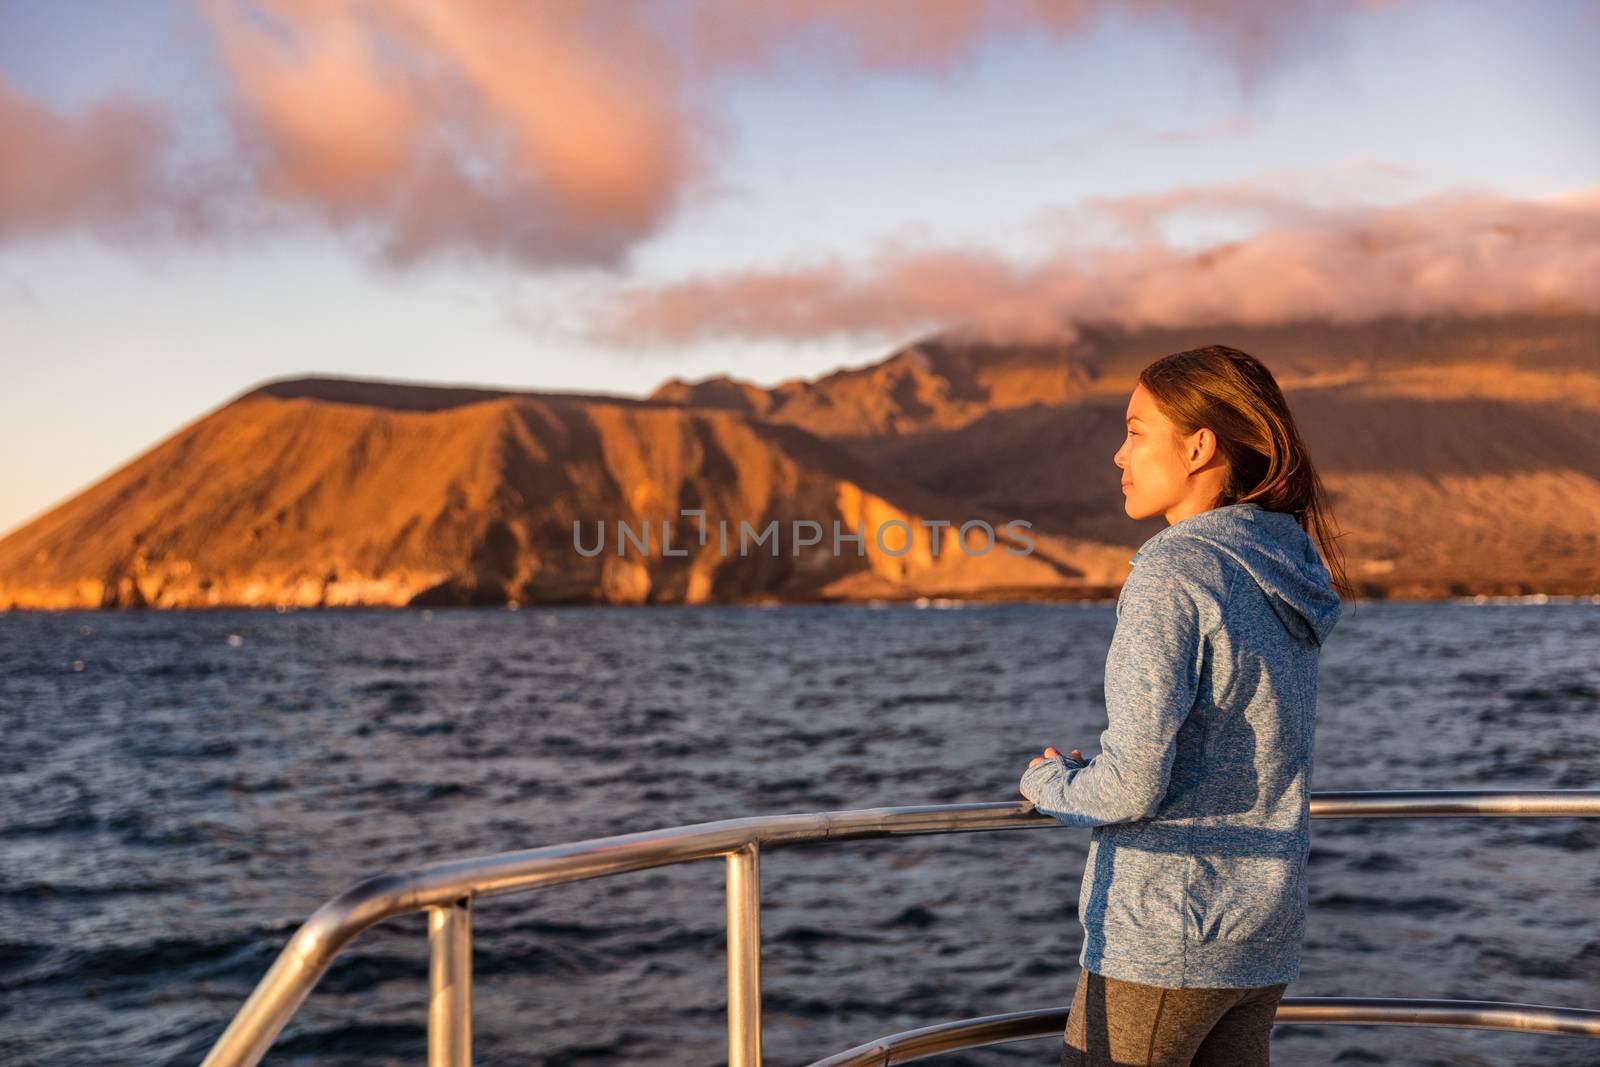 Cruise ship tourist on boat looking at sunset landscape in Galapagos Islands by Maridav